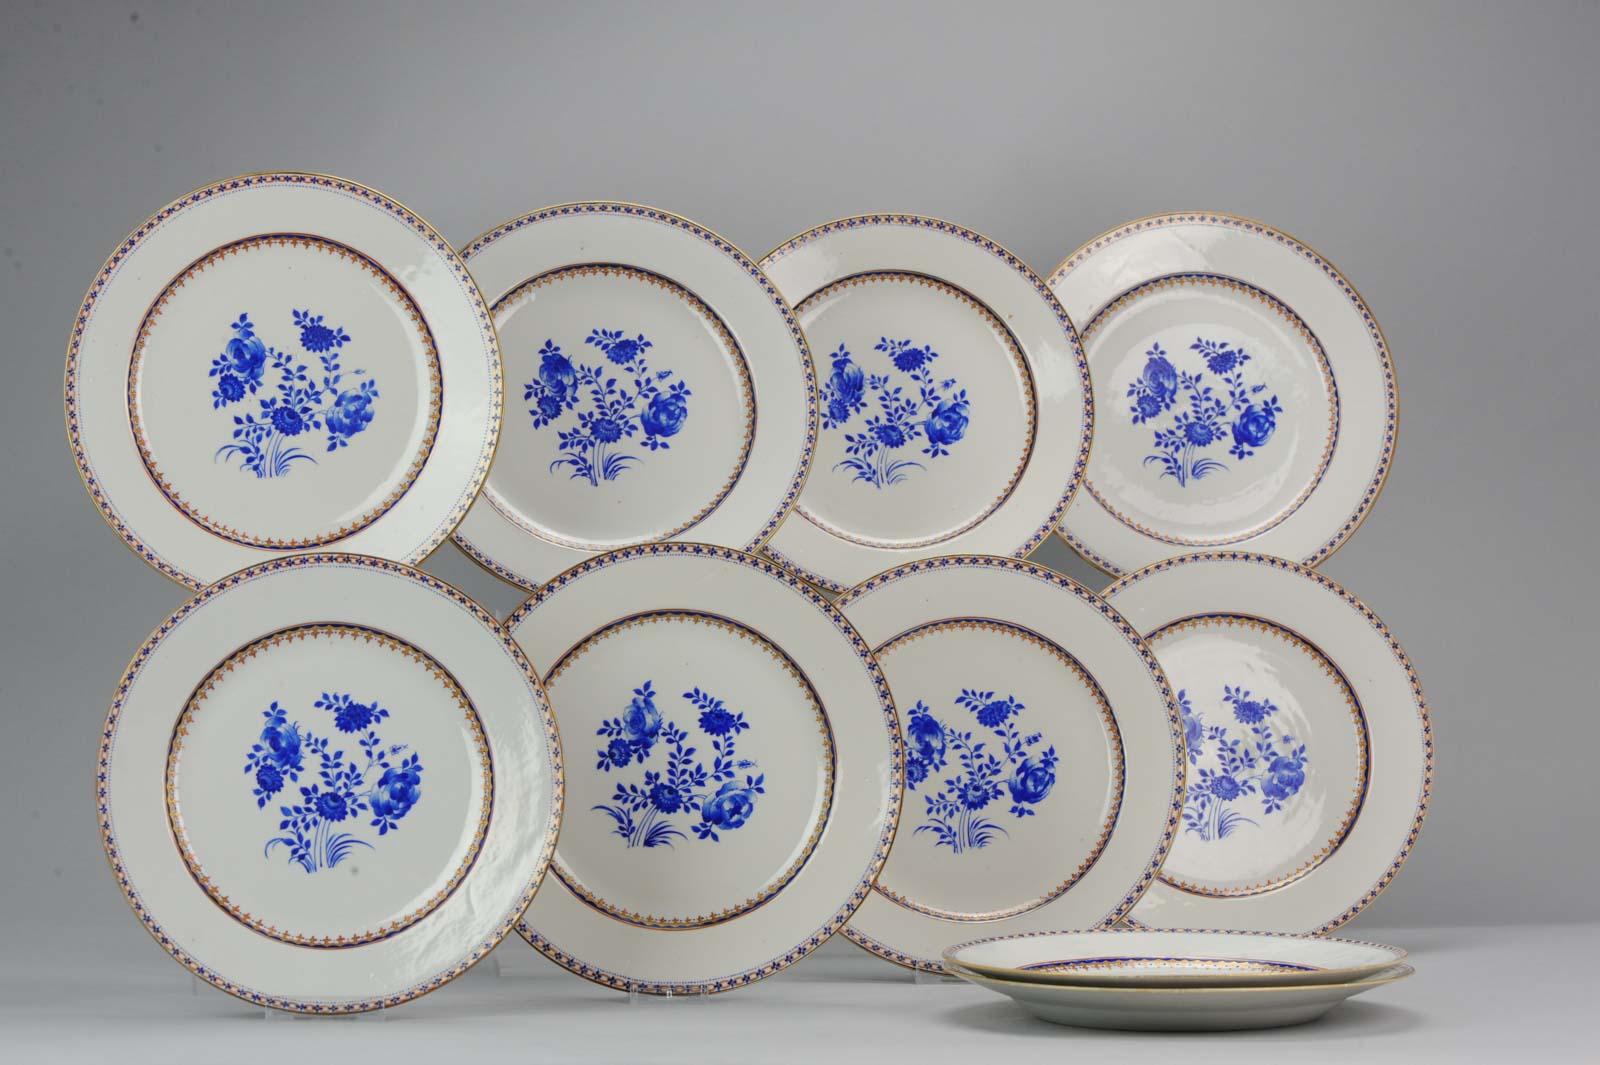 Very Rare Antique Chinese 18th Century Qianlong Period Dinner Plate Qing In Excellent Condition For Sale In Amsterdam, Noord Holland